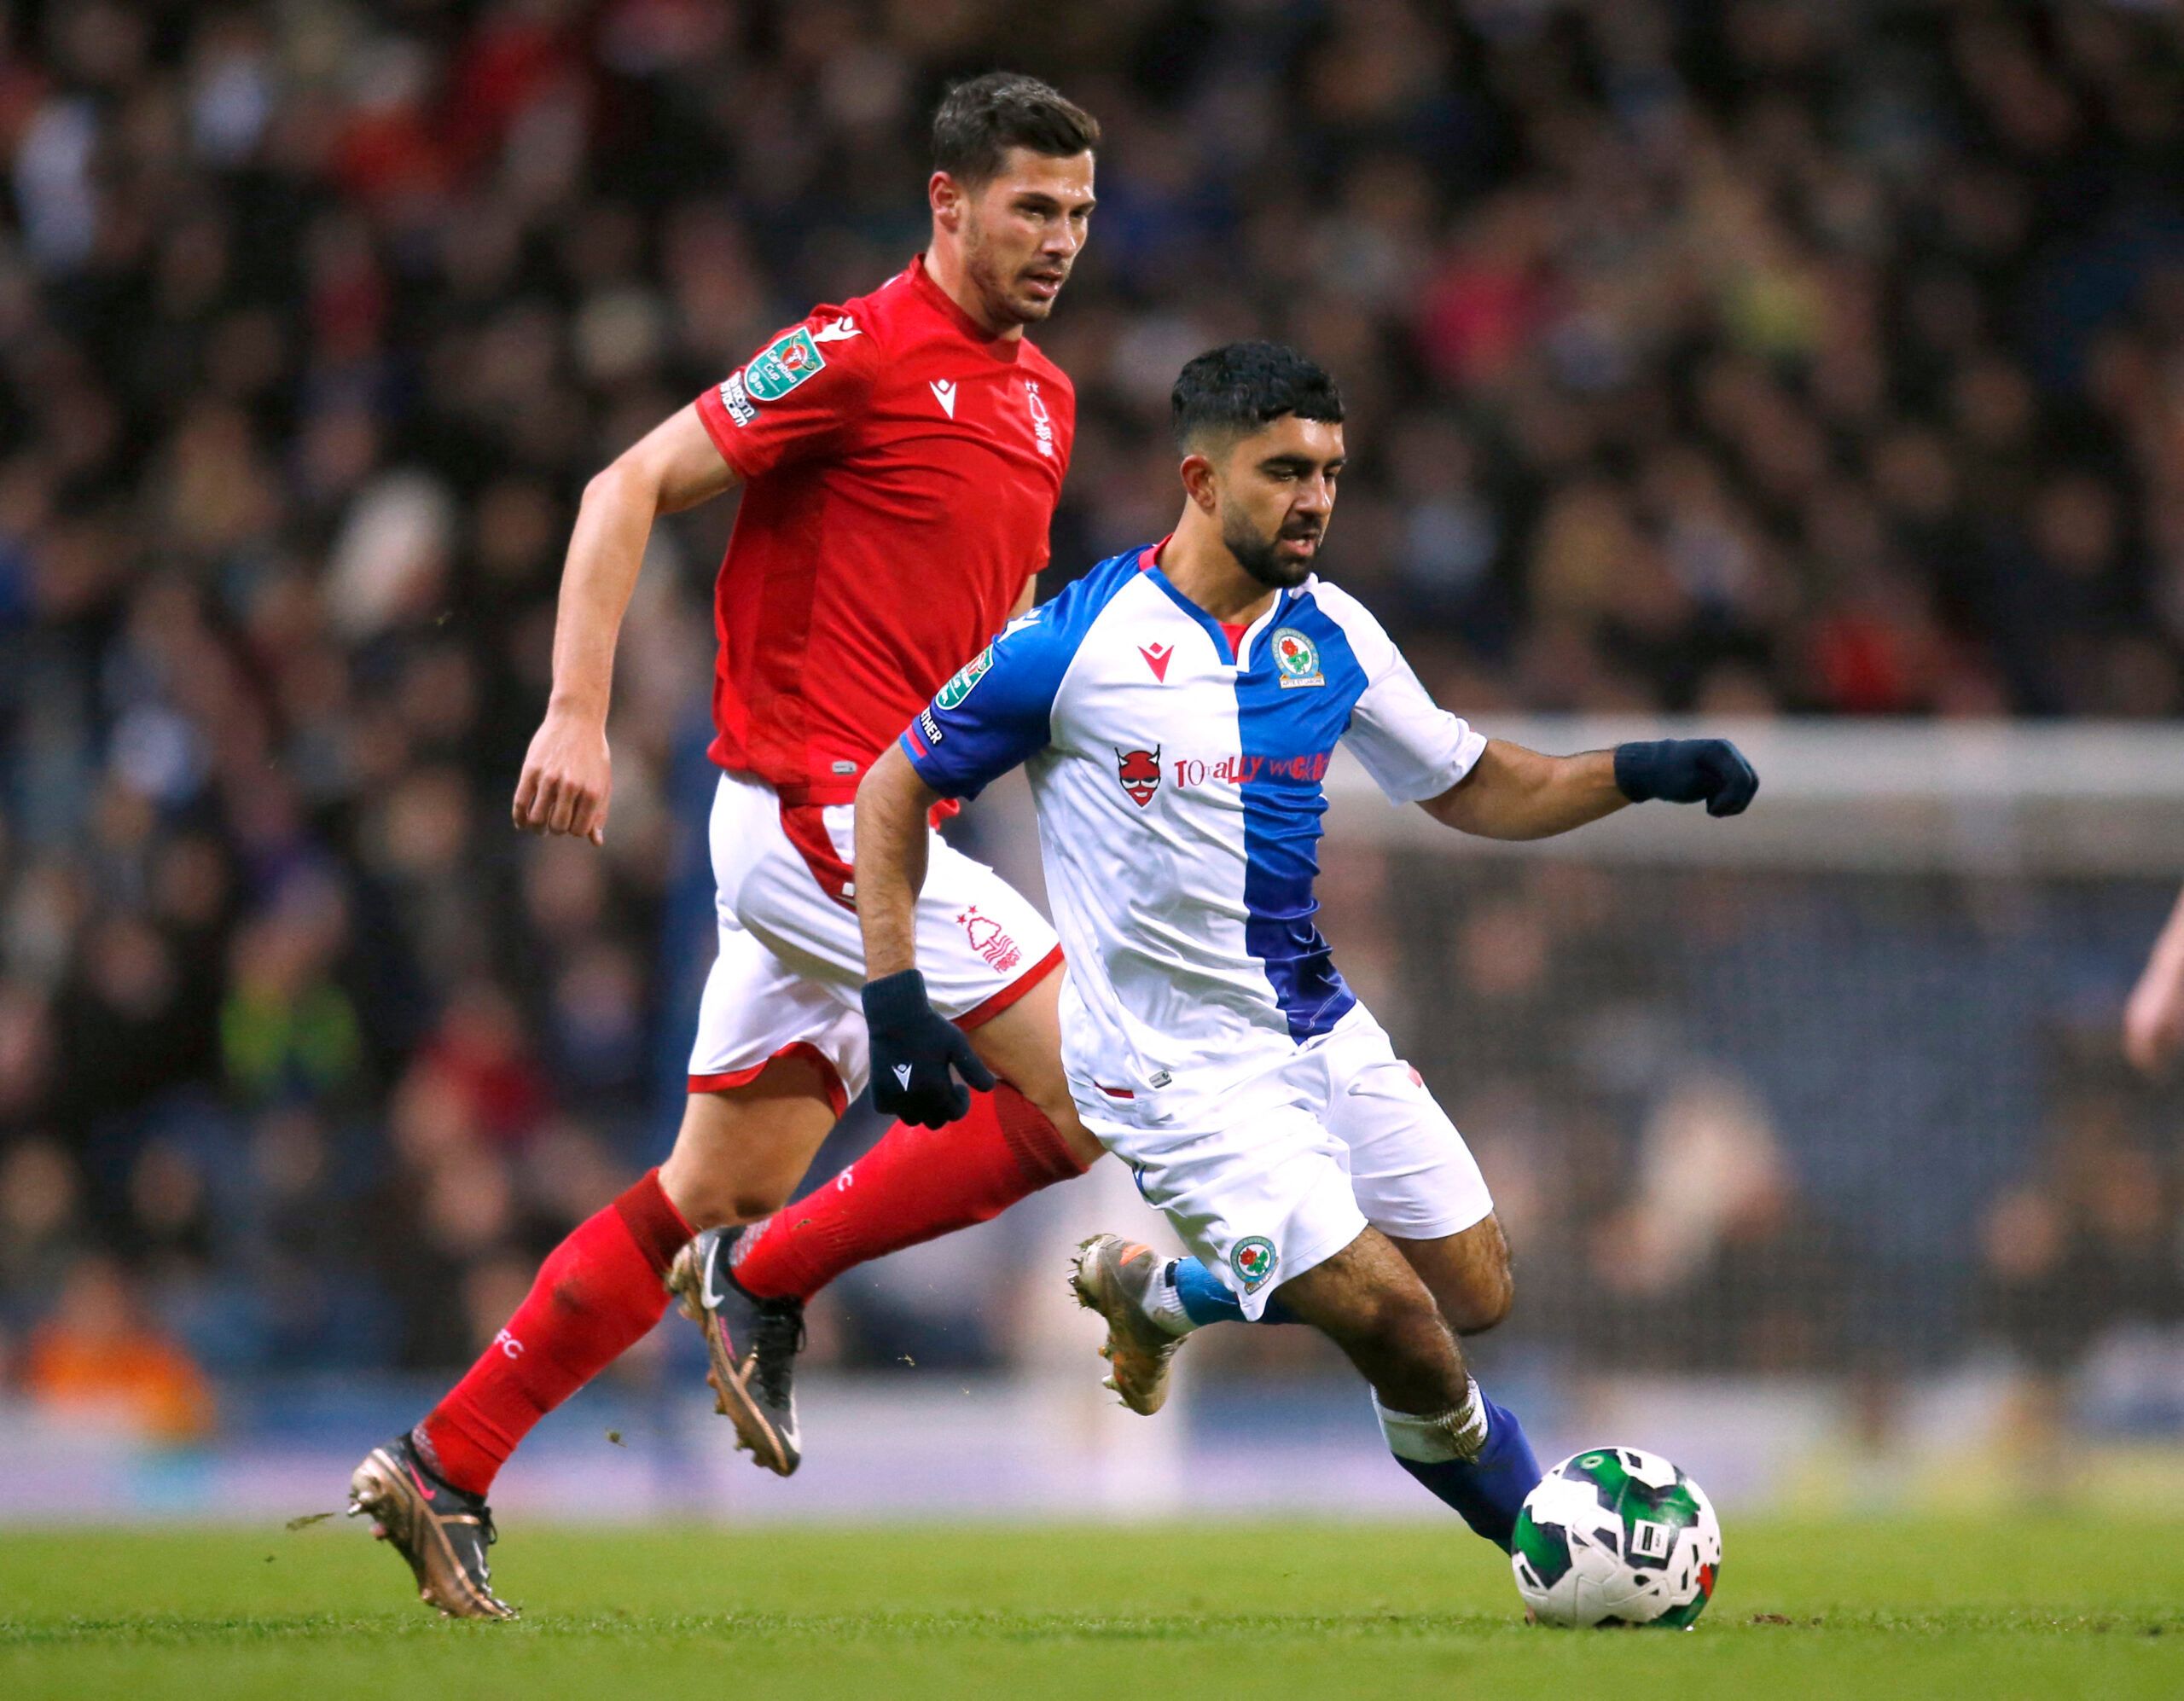 Soccer Football - Carabao Cup - Round of 16 - Blackburn Rovers v Nottingham Forest - Ewood Park, Blackburn, Britain - December 21, 2022 Blackburn Rovers' Dilan Kumar Markanday in action with Nottingham Forest's Remo Freuler Action Images via Reuters/Ed Sykes EDITORIAL USE ONLY. No use with unauthorized audio, video, data, fixture lists, club/league logos or 'live' services. Online in-match use limited to 75 images, no video emulation. No use in betting, games or single club /league/player public